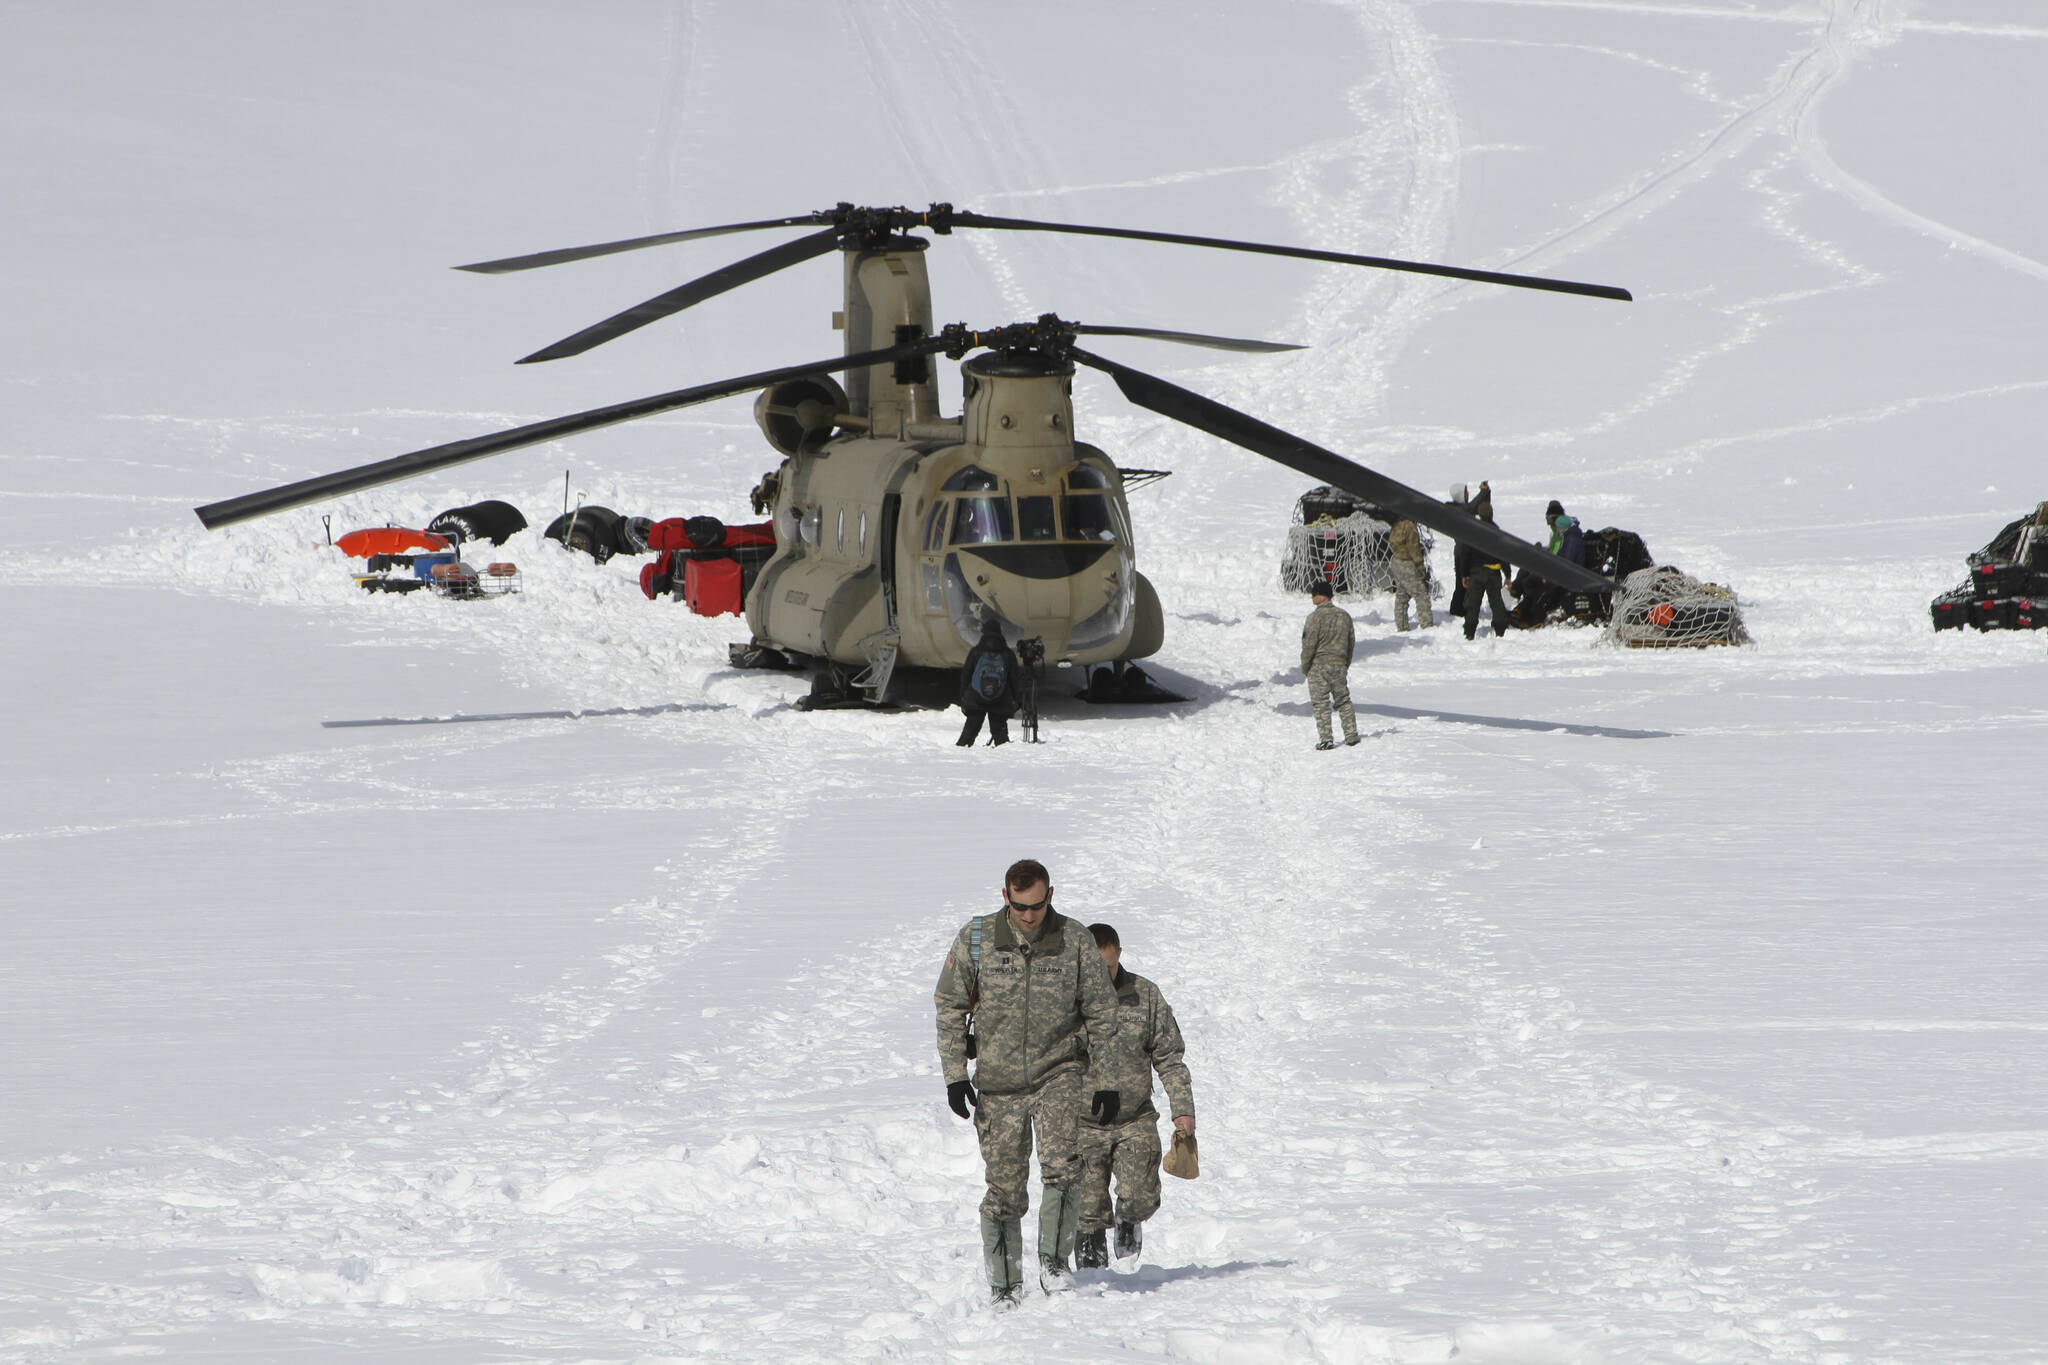 Capt. Corey Wheeler, front, commander of B Company, 1st Battalion, 52nd Aviation Regiment at Fort Wainwright, Alaska, walks away from a Chinook helicopter that landed on the glacier near Denali, April 24, 2016, on the Kahiltna Glacier in Alaska. The U.S. Army helped set up base camp on North America’s tallest mountain. The U.S. Army is poised to revamp its forces in Alaska to better prepare for future cold-weather conflicts, and it is expected to replace the larger, heavily equipped Stryker Brigade there with a more mobile, infantry unit better suited for the frigid fight, according to Army leaders. (AP Photo/Mark Thiessen, File)